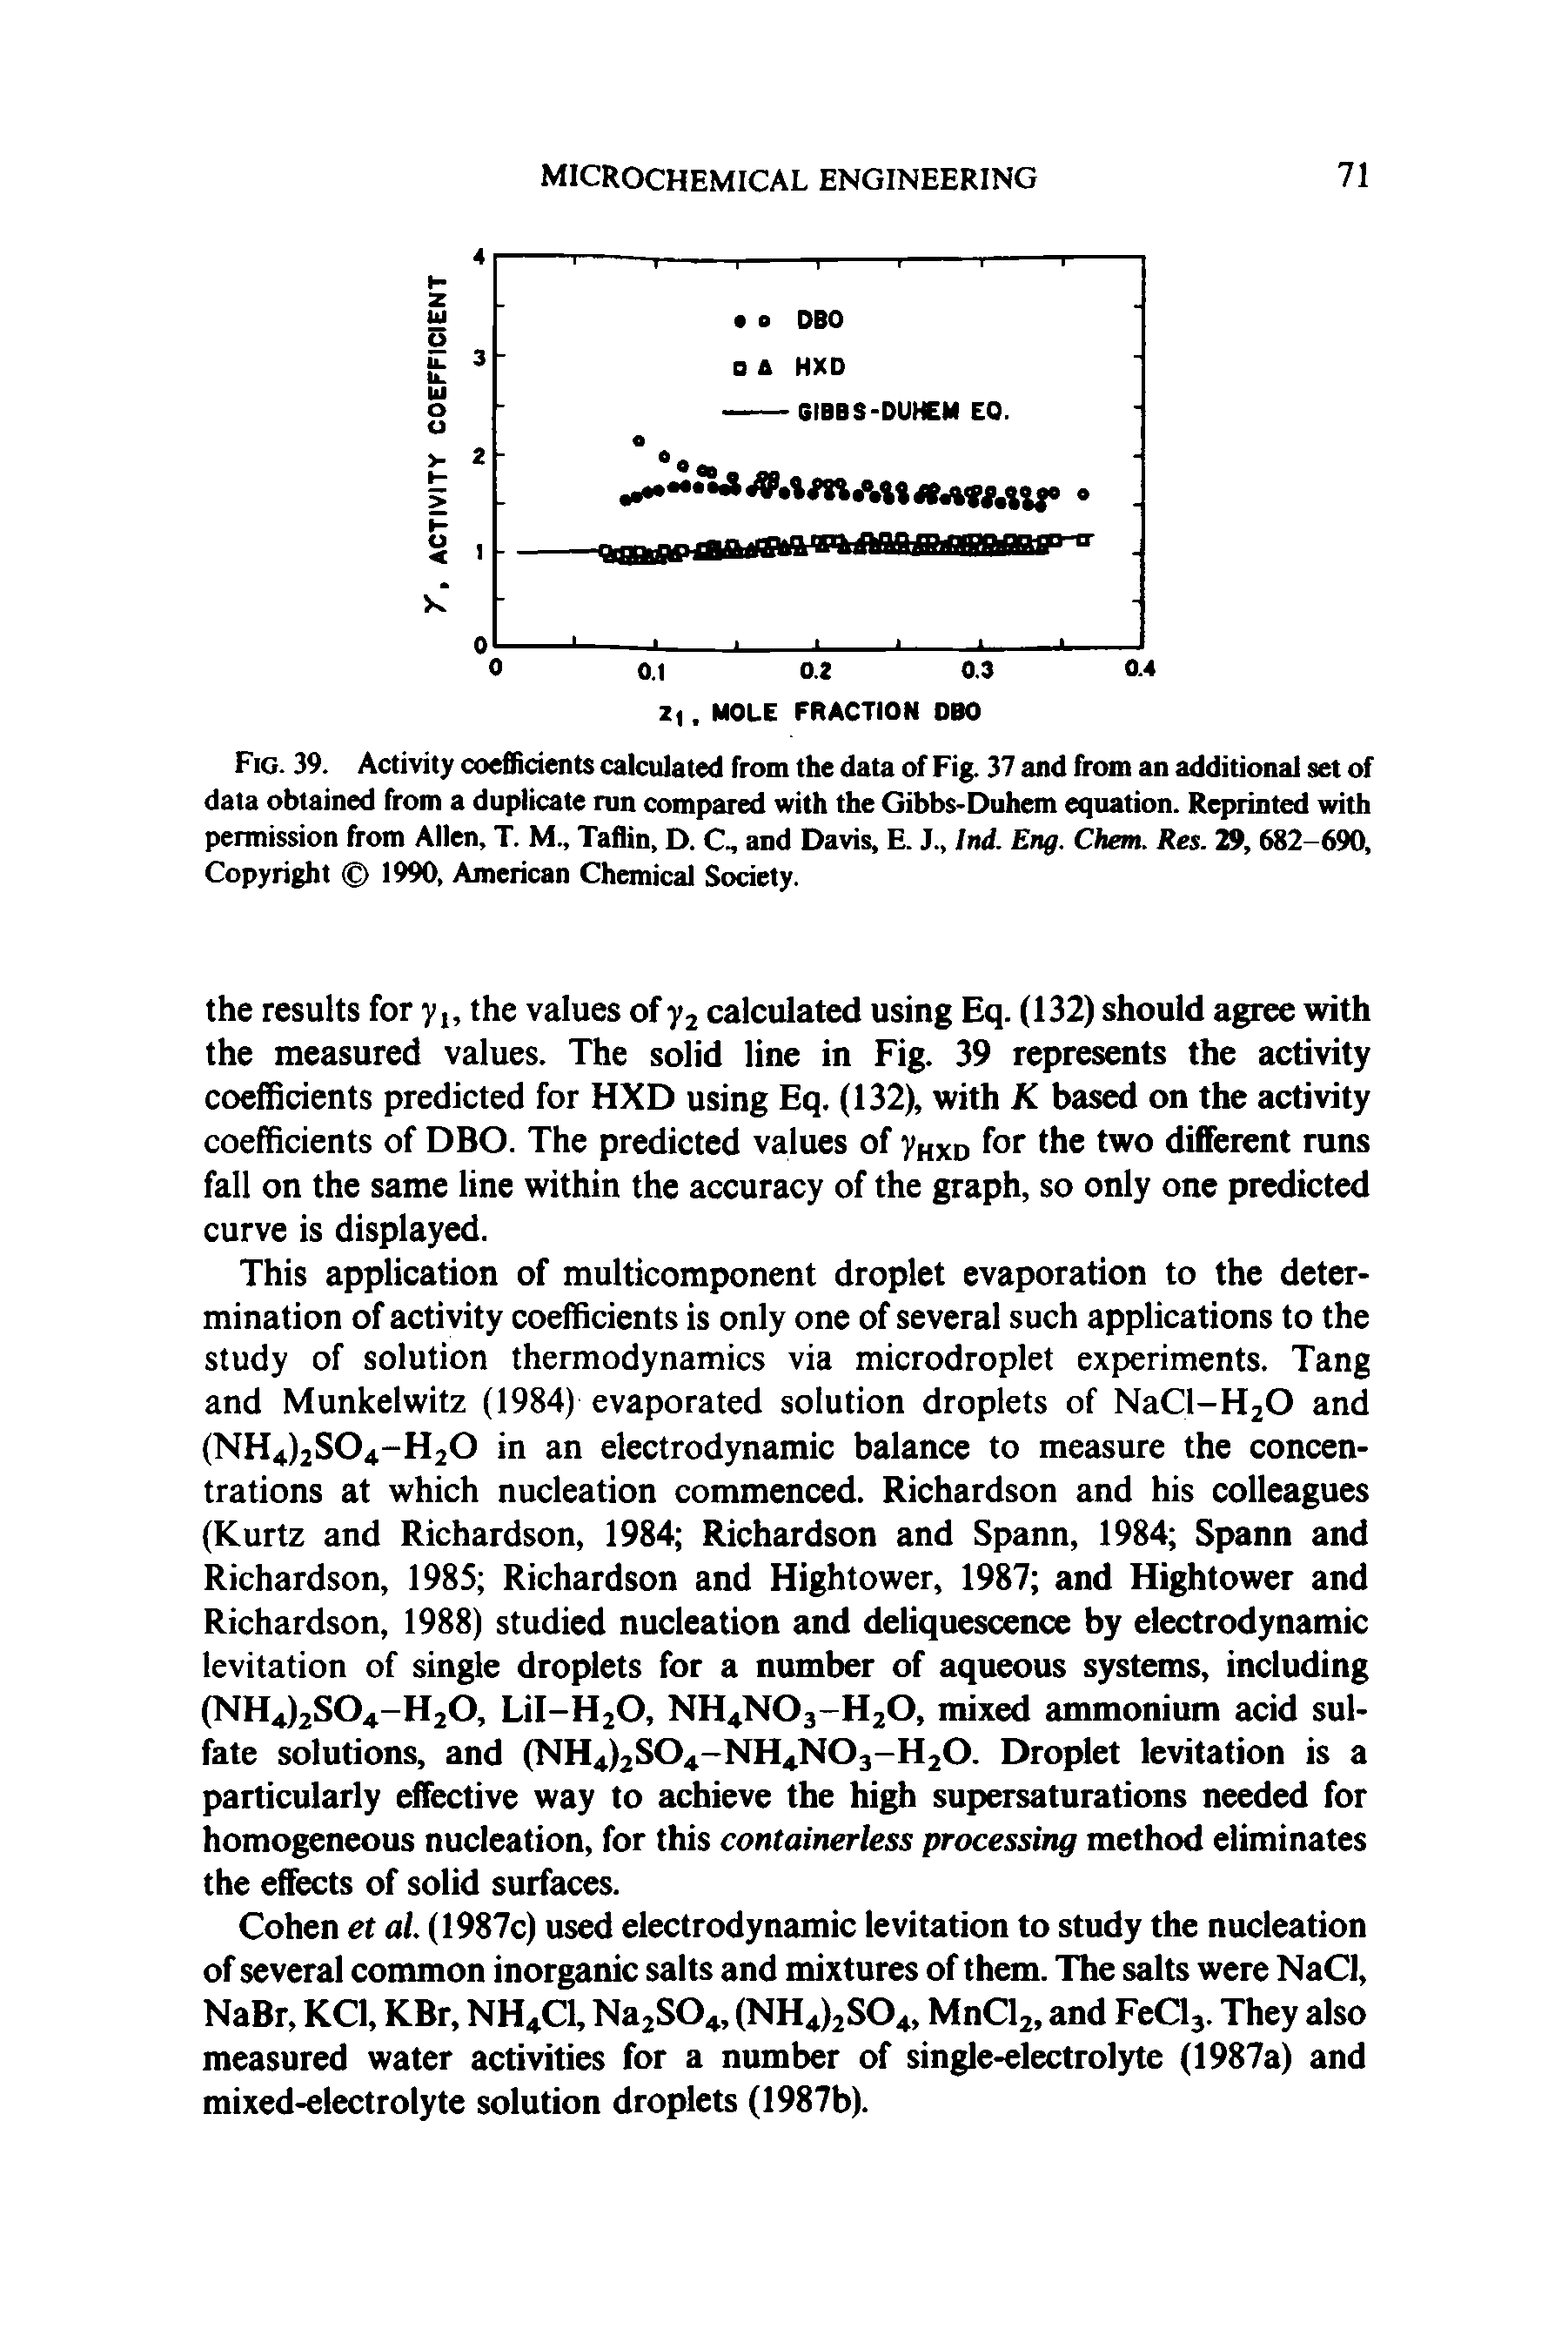 Fig. 39. Activity coefficients calculated from the data of Fig. 37 and from an additional set of data obtained from a duplicate run compared with the Gibbs-Duhem equation. Reprinted with permission from Allen, T. M., Taflin, D. C, and Davis, E. J., Ind. Eng. Chem. Res. 29, 682-690, Copyright 1990, American Chemical Society.